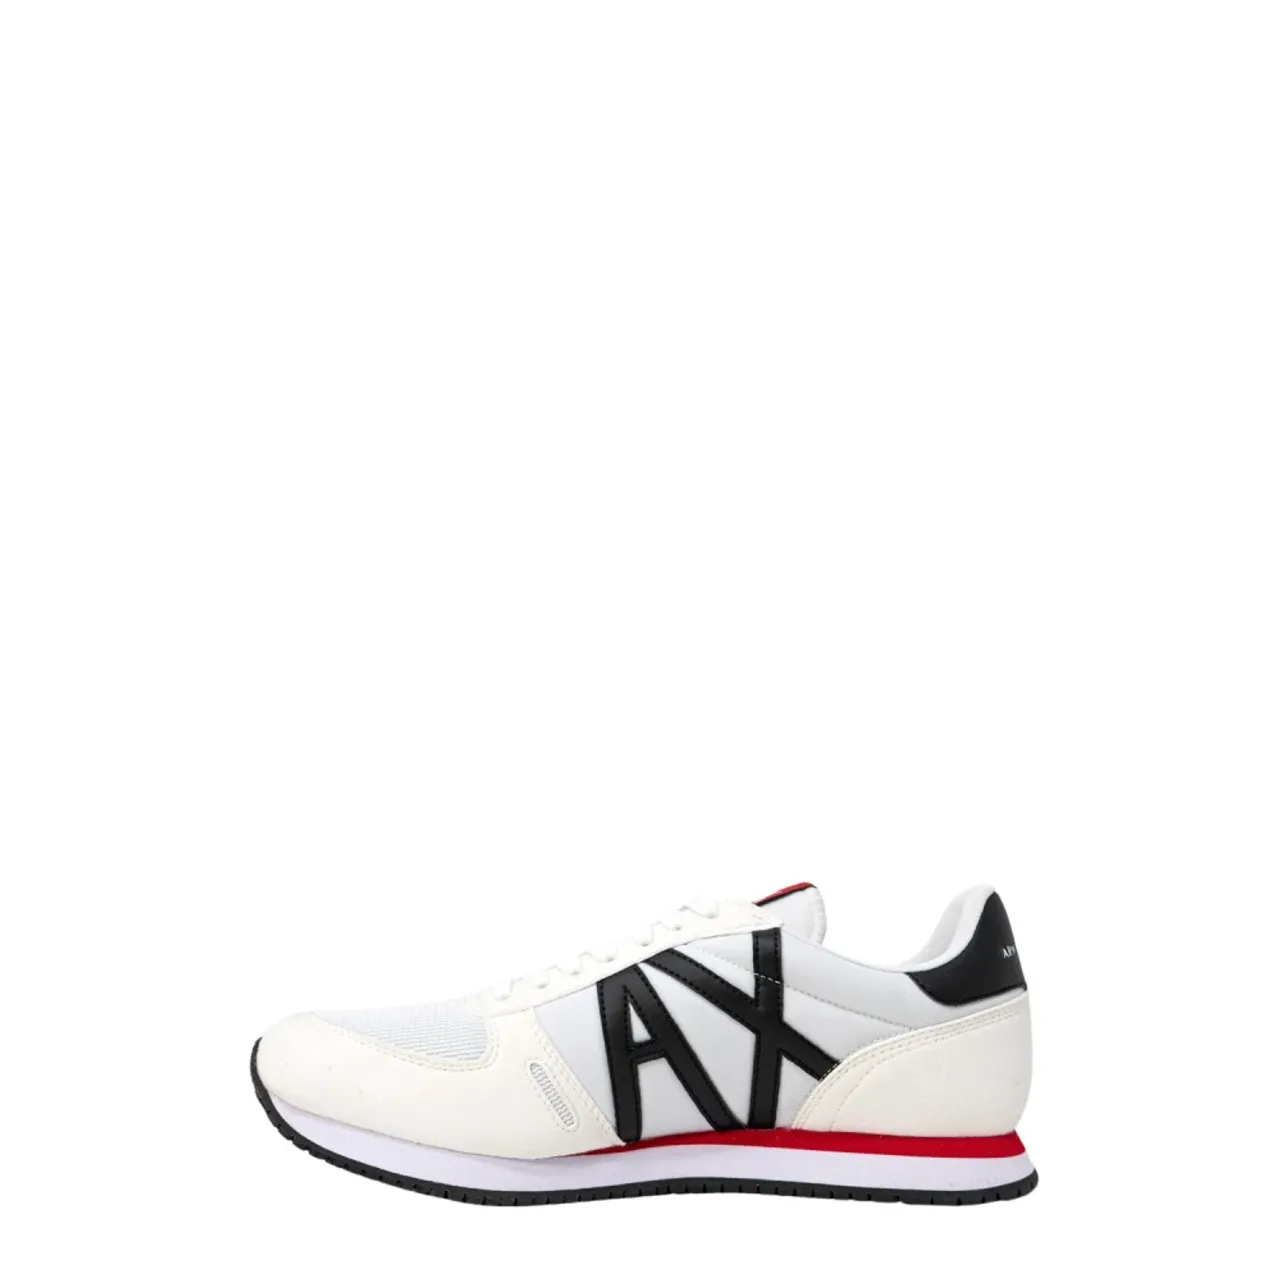 Armani Exchange , Mens Sneakers - Micro Suede ,White male, Sizes: